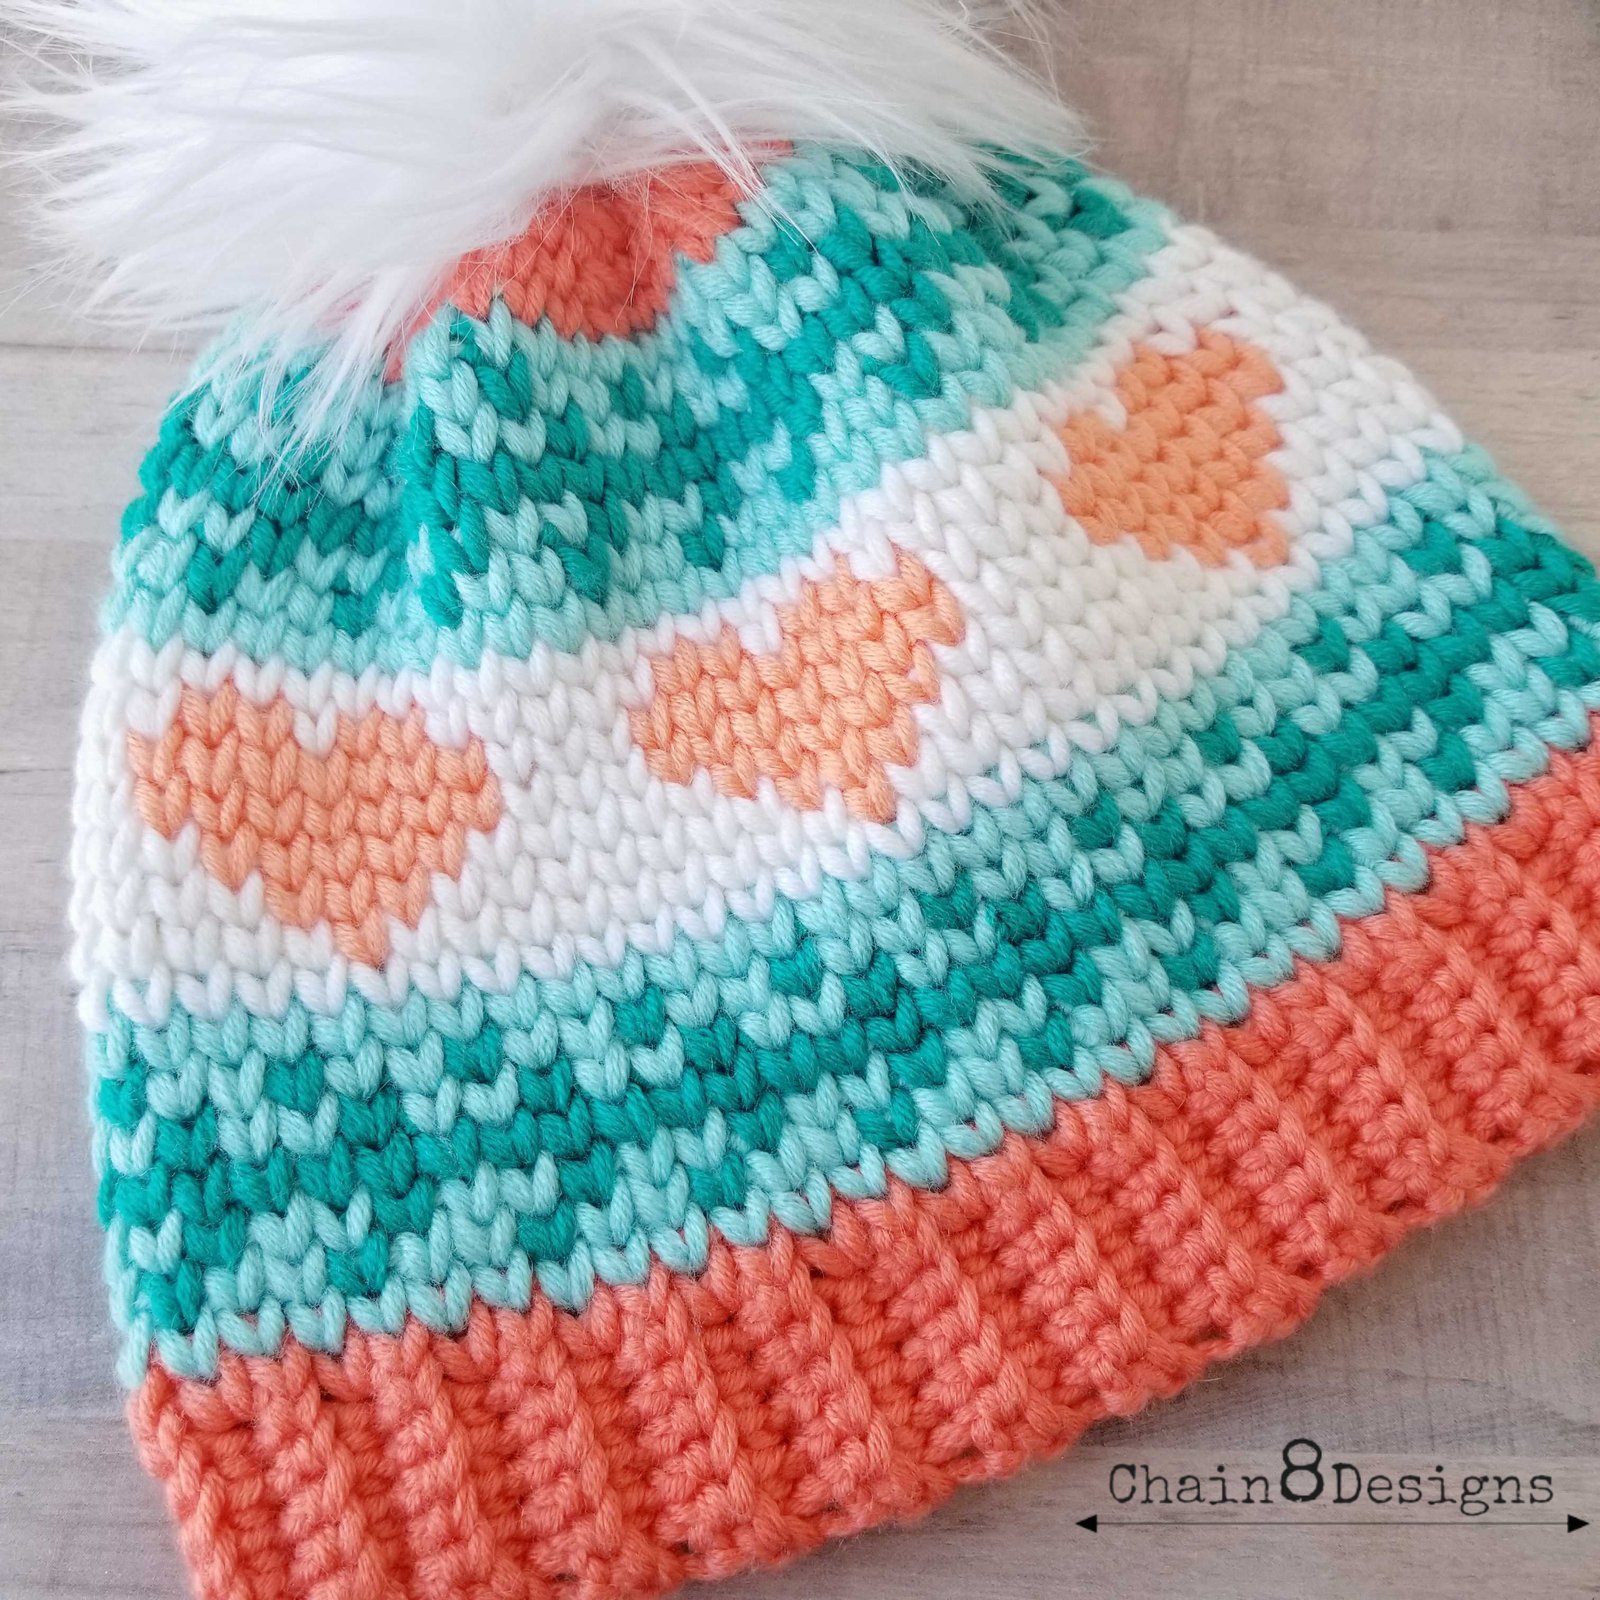 Peachy Keen Crochet Beanie by Chain 8 Designs | Let someone know that you think they are Peachy Keen with this cute crochet beanie. Get the look of knit but in crochet! Easy to follow pattern with lots of pictures.